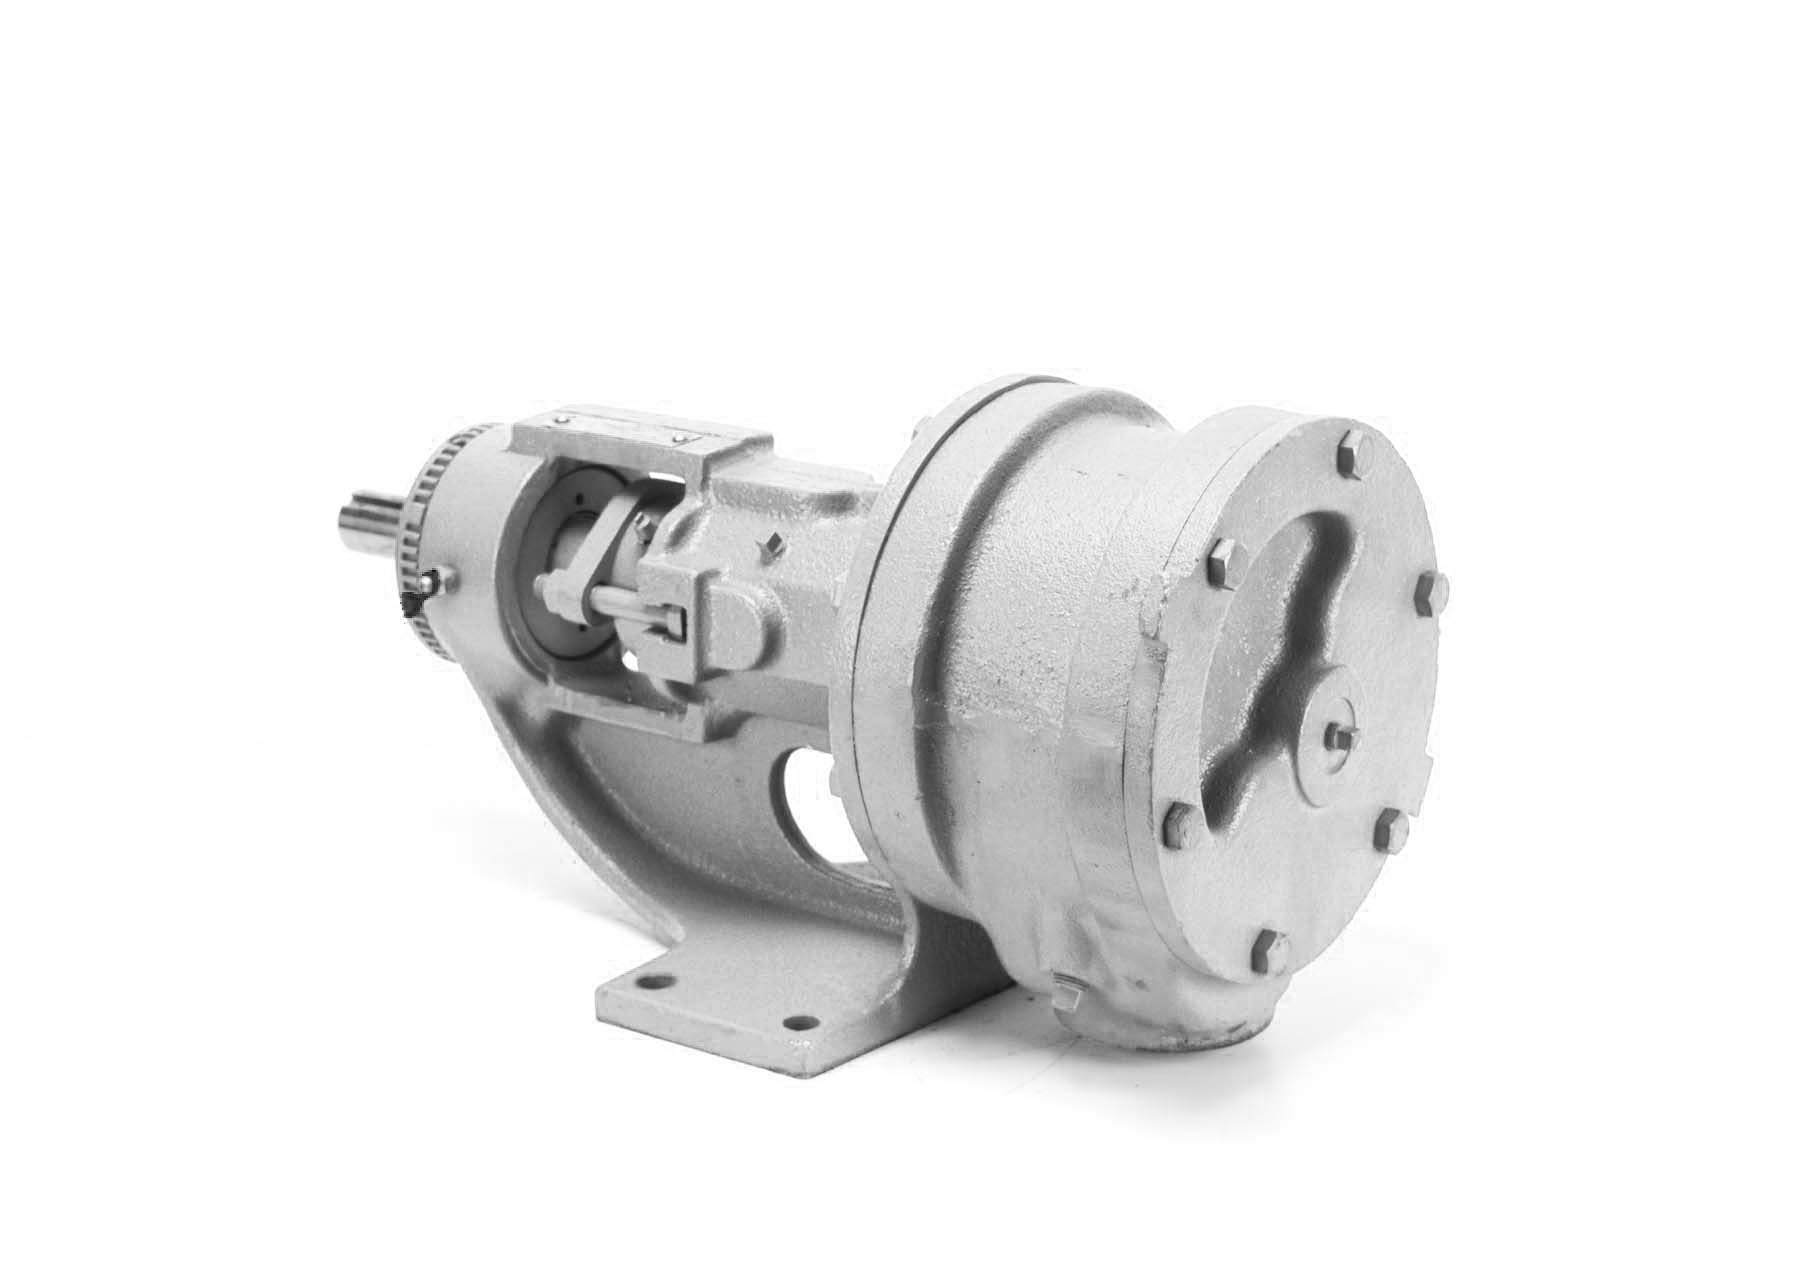 Aftermarket Drop-In Replaces Viking® K4124A Pump